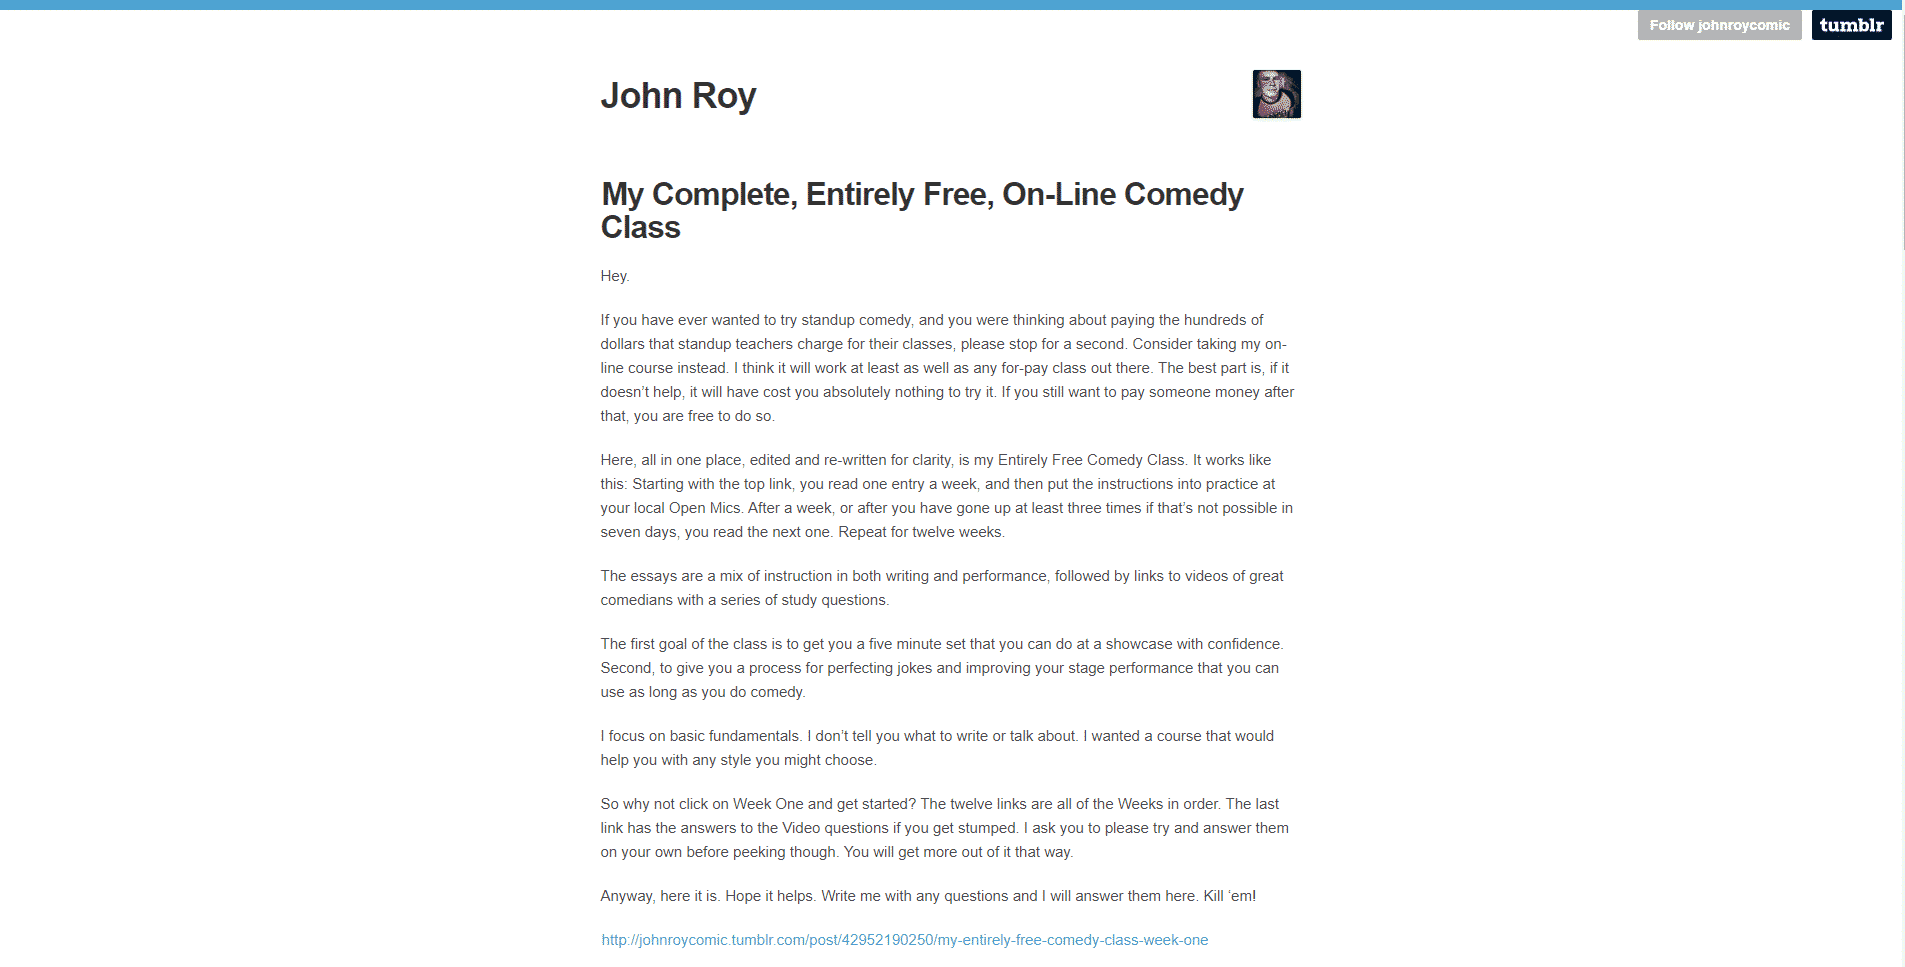 John Roy’s Learn Comedy Lessons Online